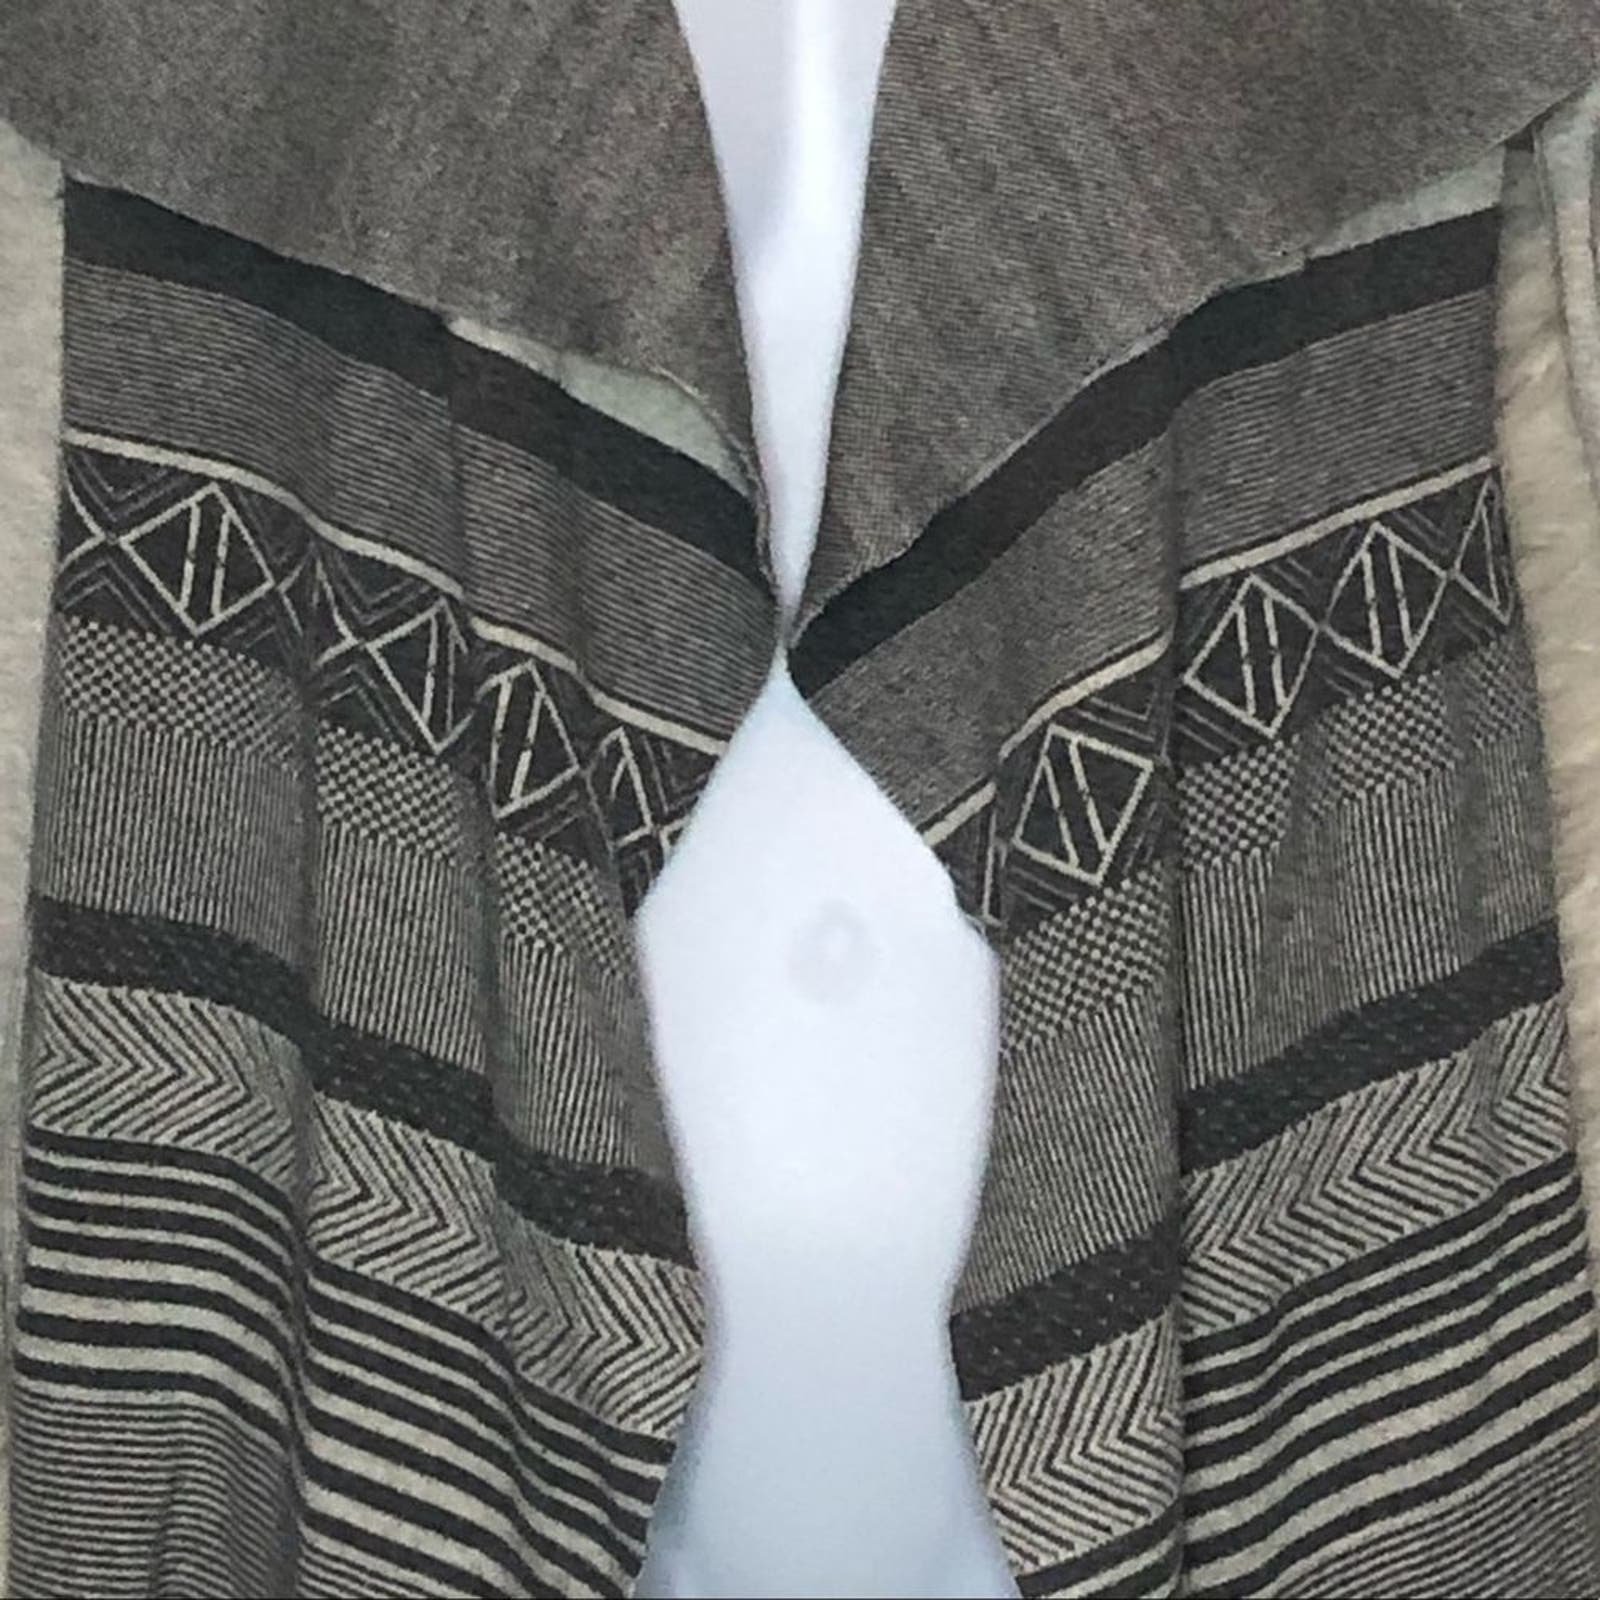 Special offer  Anthropologie ruby moon Grey Drape Open Front Cardigan size Medium I7PP9HkqN Cool